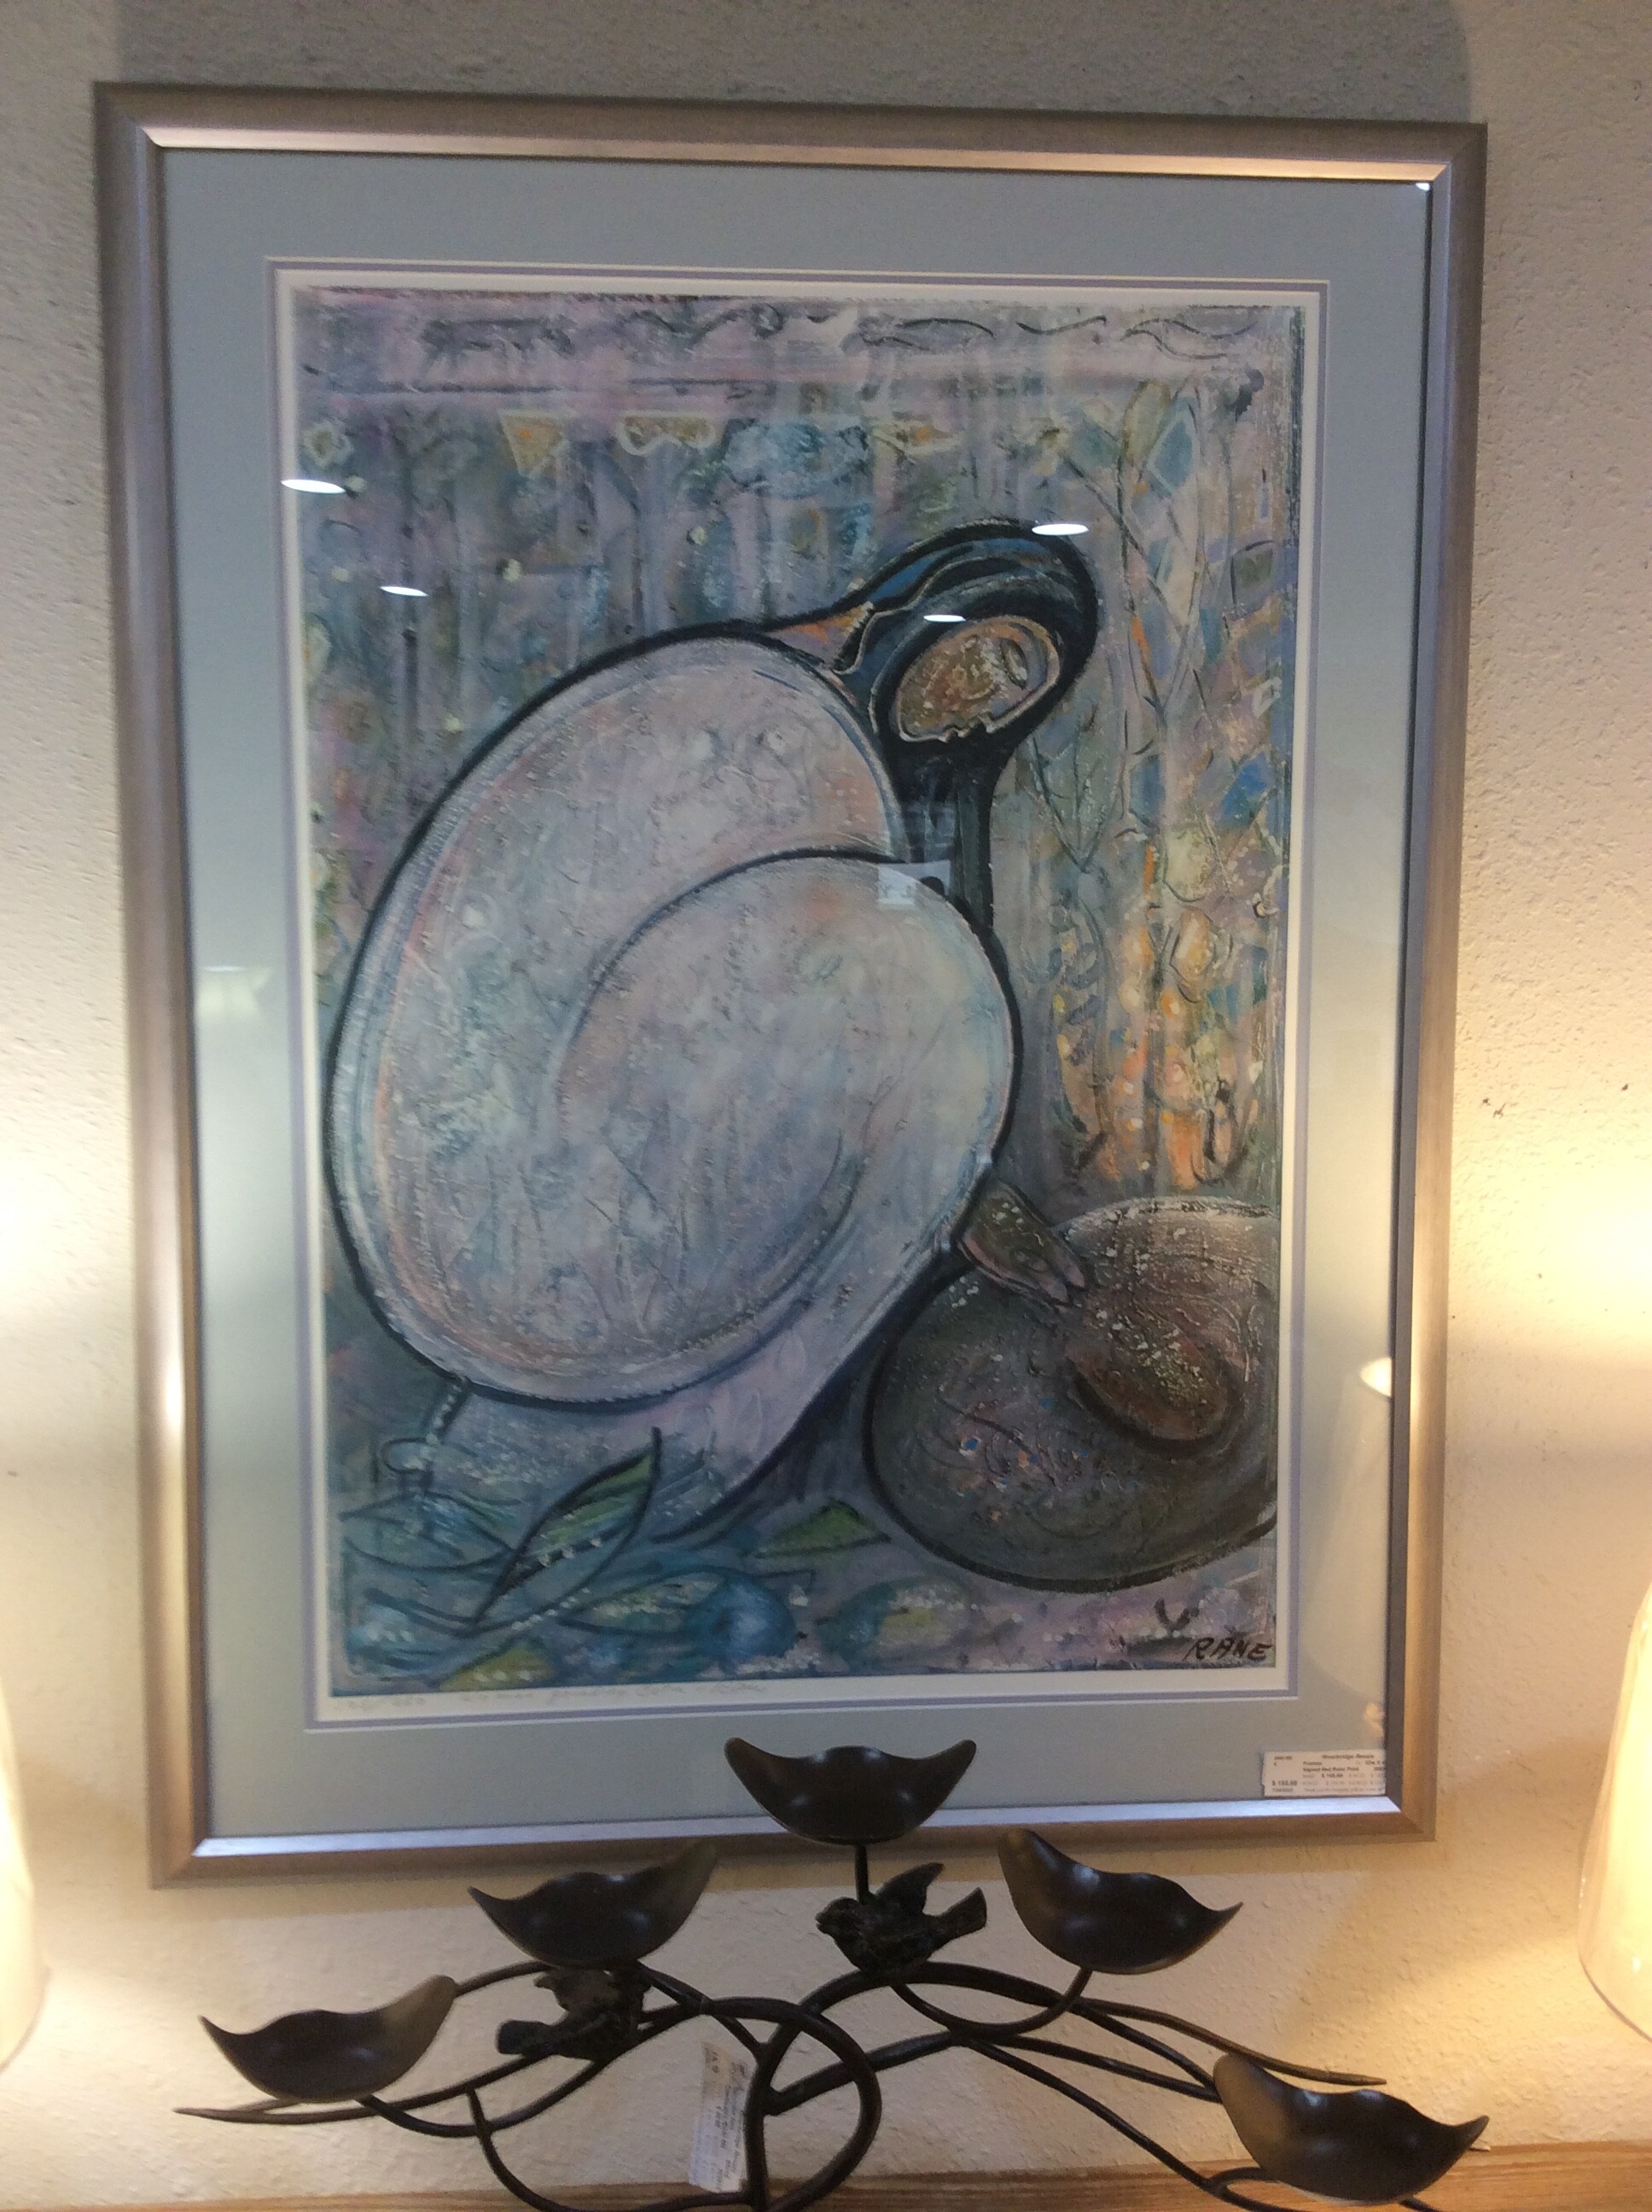 This is a signed and numbered Rane Print of a women grinding corn abstract. This print has a blue matting and silver frame.